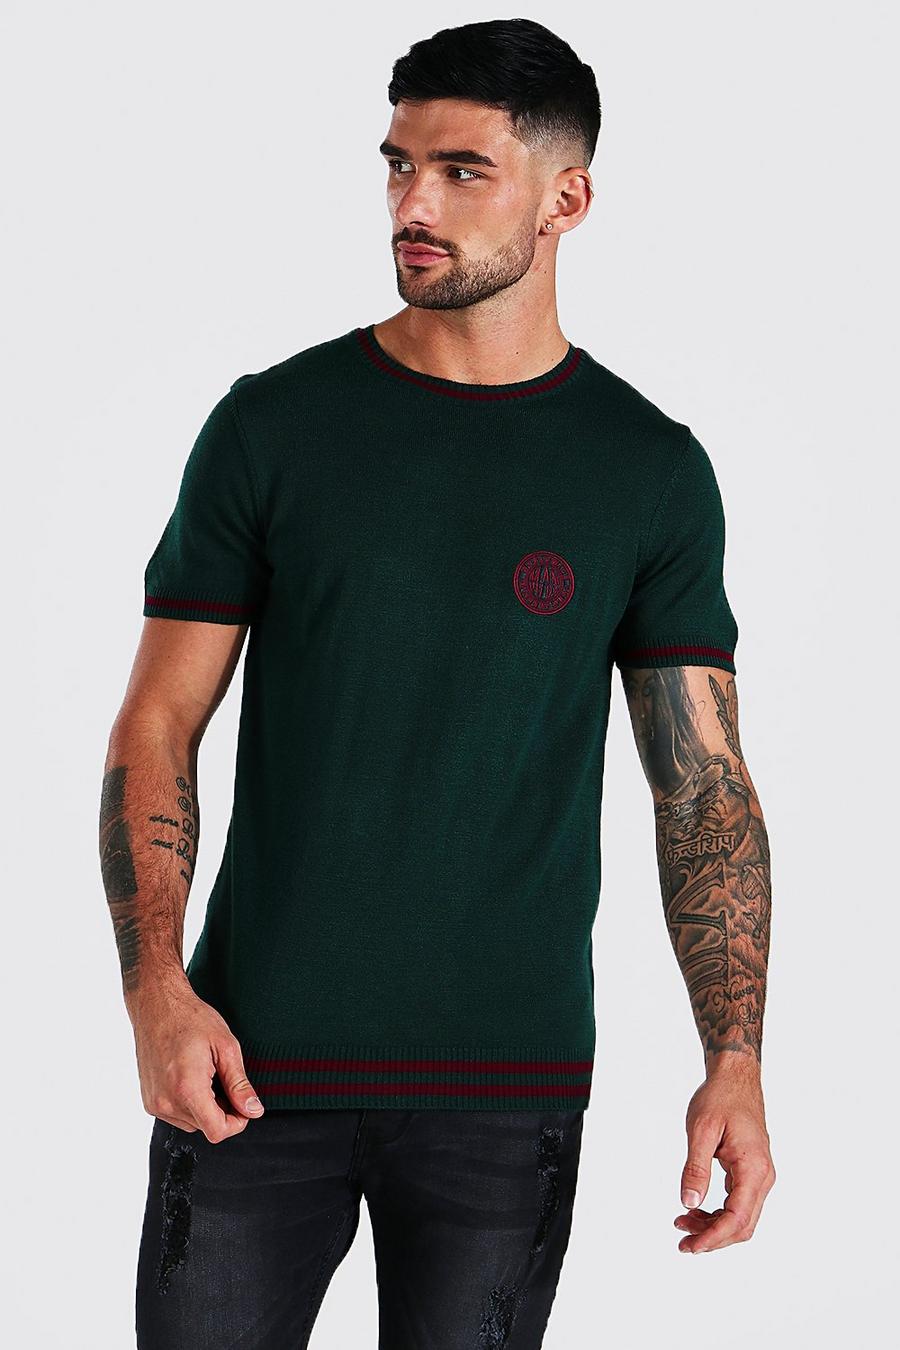 T-shirt in maglia con stemma Man in stile Varsity, Green image number 1